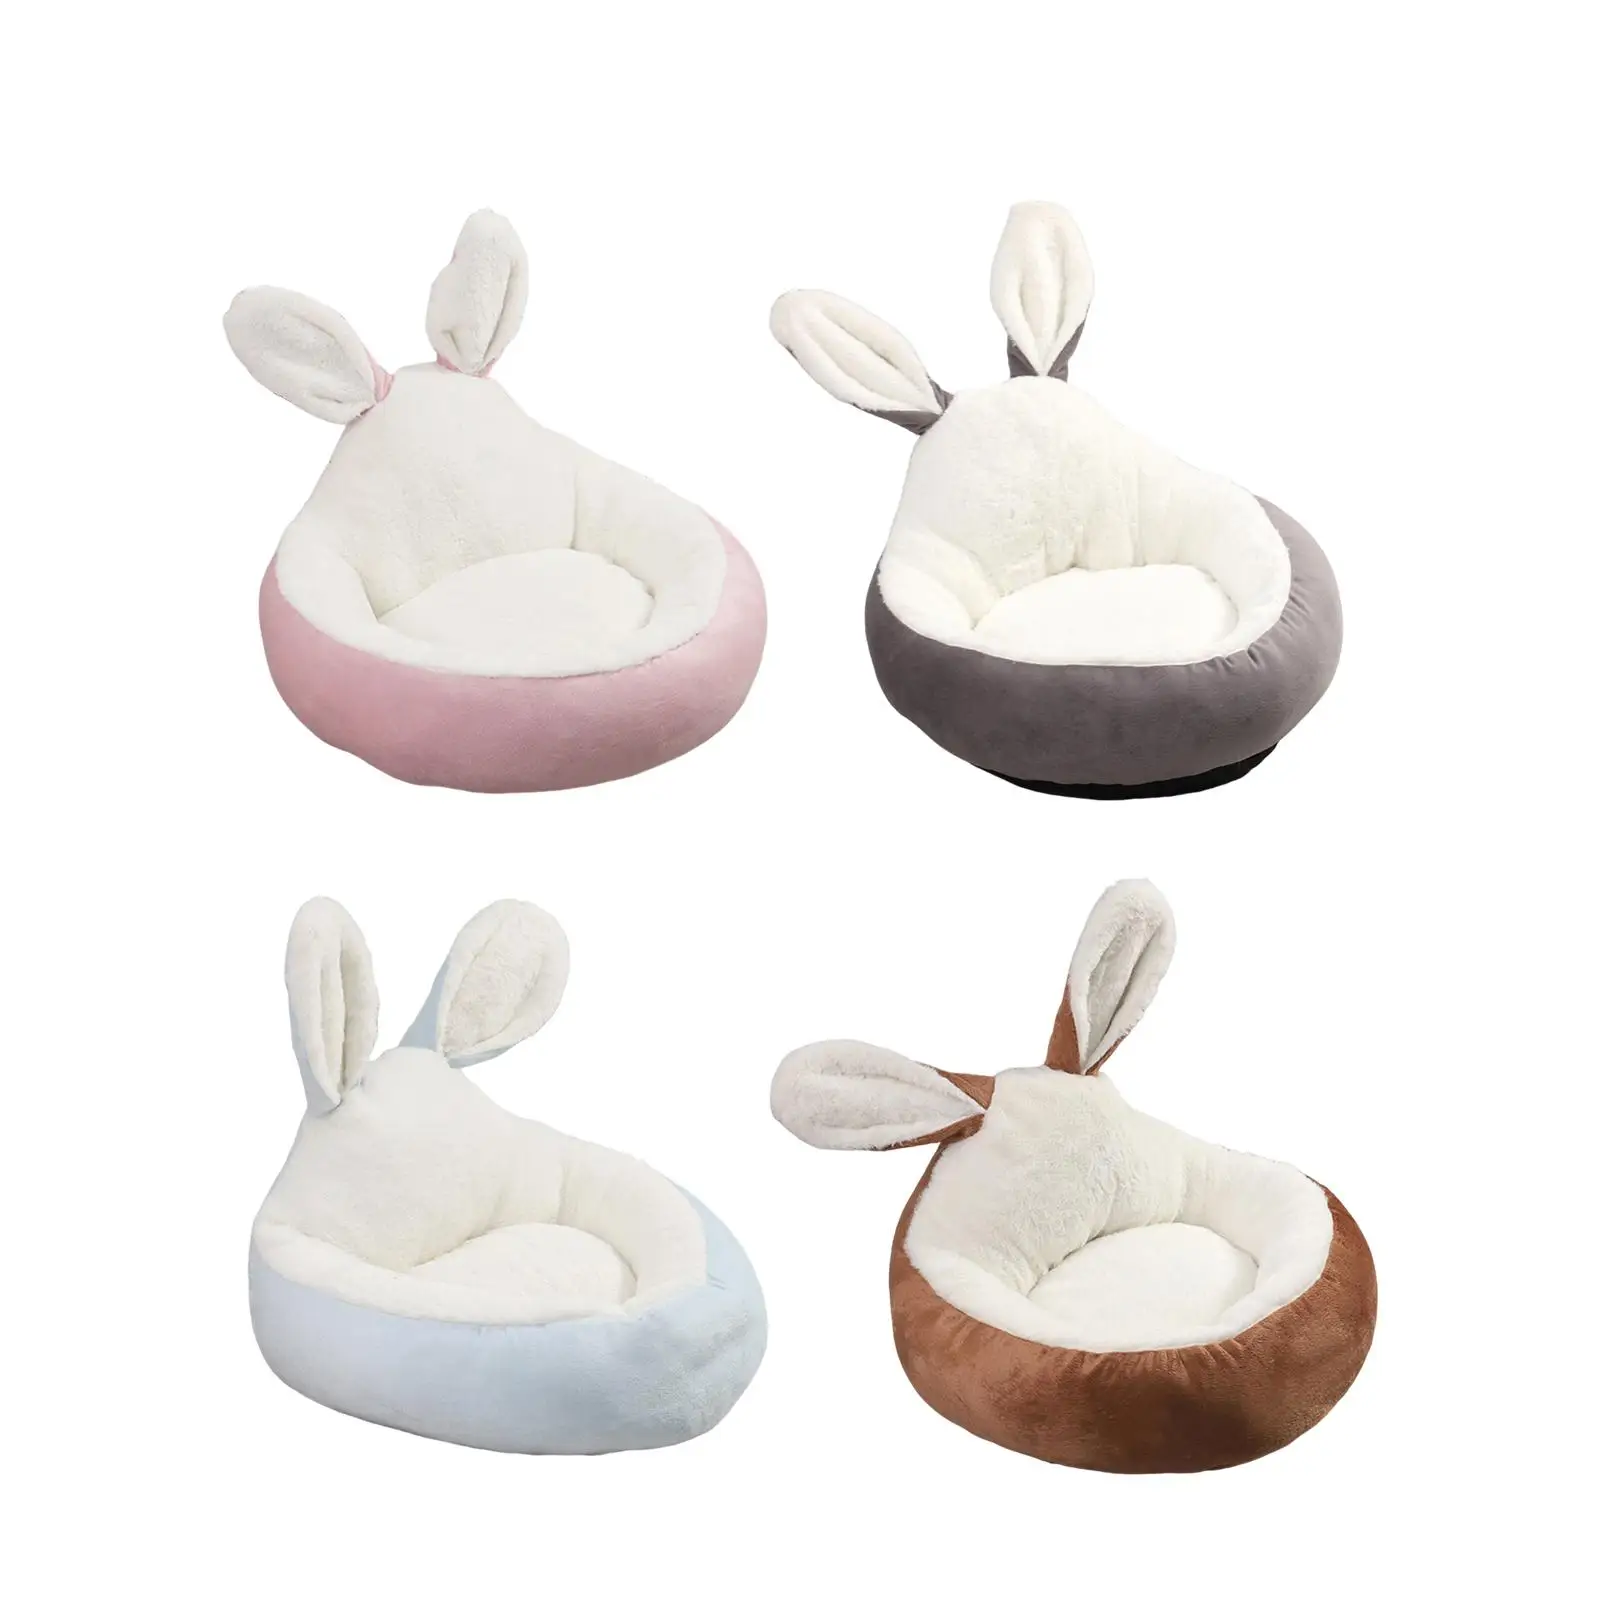 Pet Bed Nonslip Bottom Cat Sleeping Pad Winter Warm Nest Bunny Ears Decor Dog Bed Puppy Kennel for Small Medium Dogs Cats